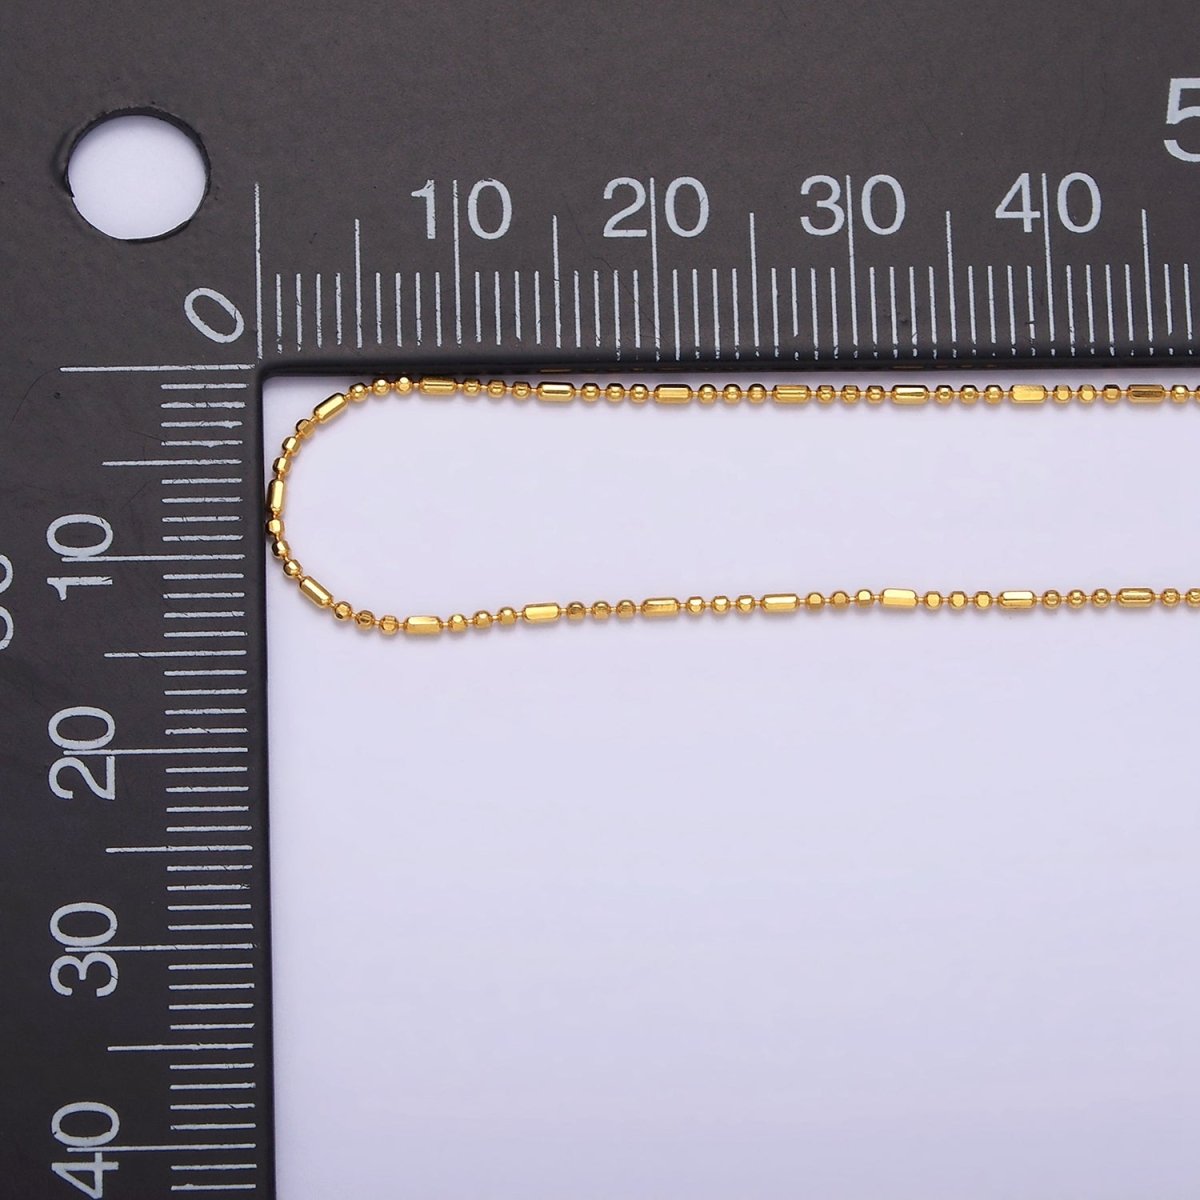 16K Gold Vermeil S925 Sterling Silver 0.9mm Dainty Bead Tube 15.5 Inch Choker Chain Necklace | WA-1948 Clearance Pricing - DLUXCA